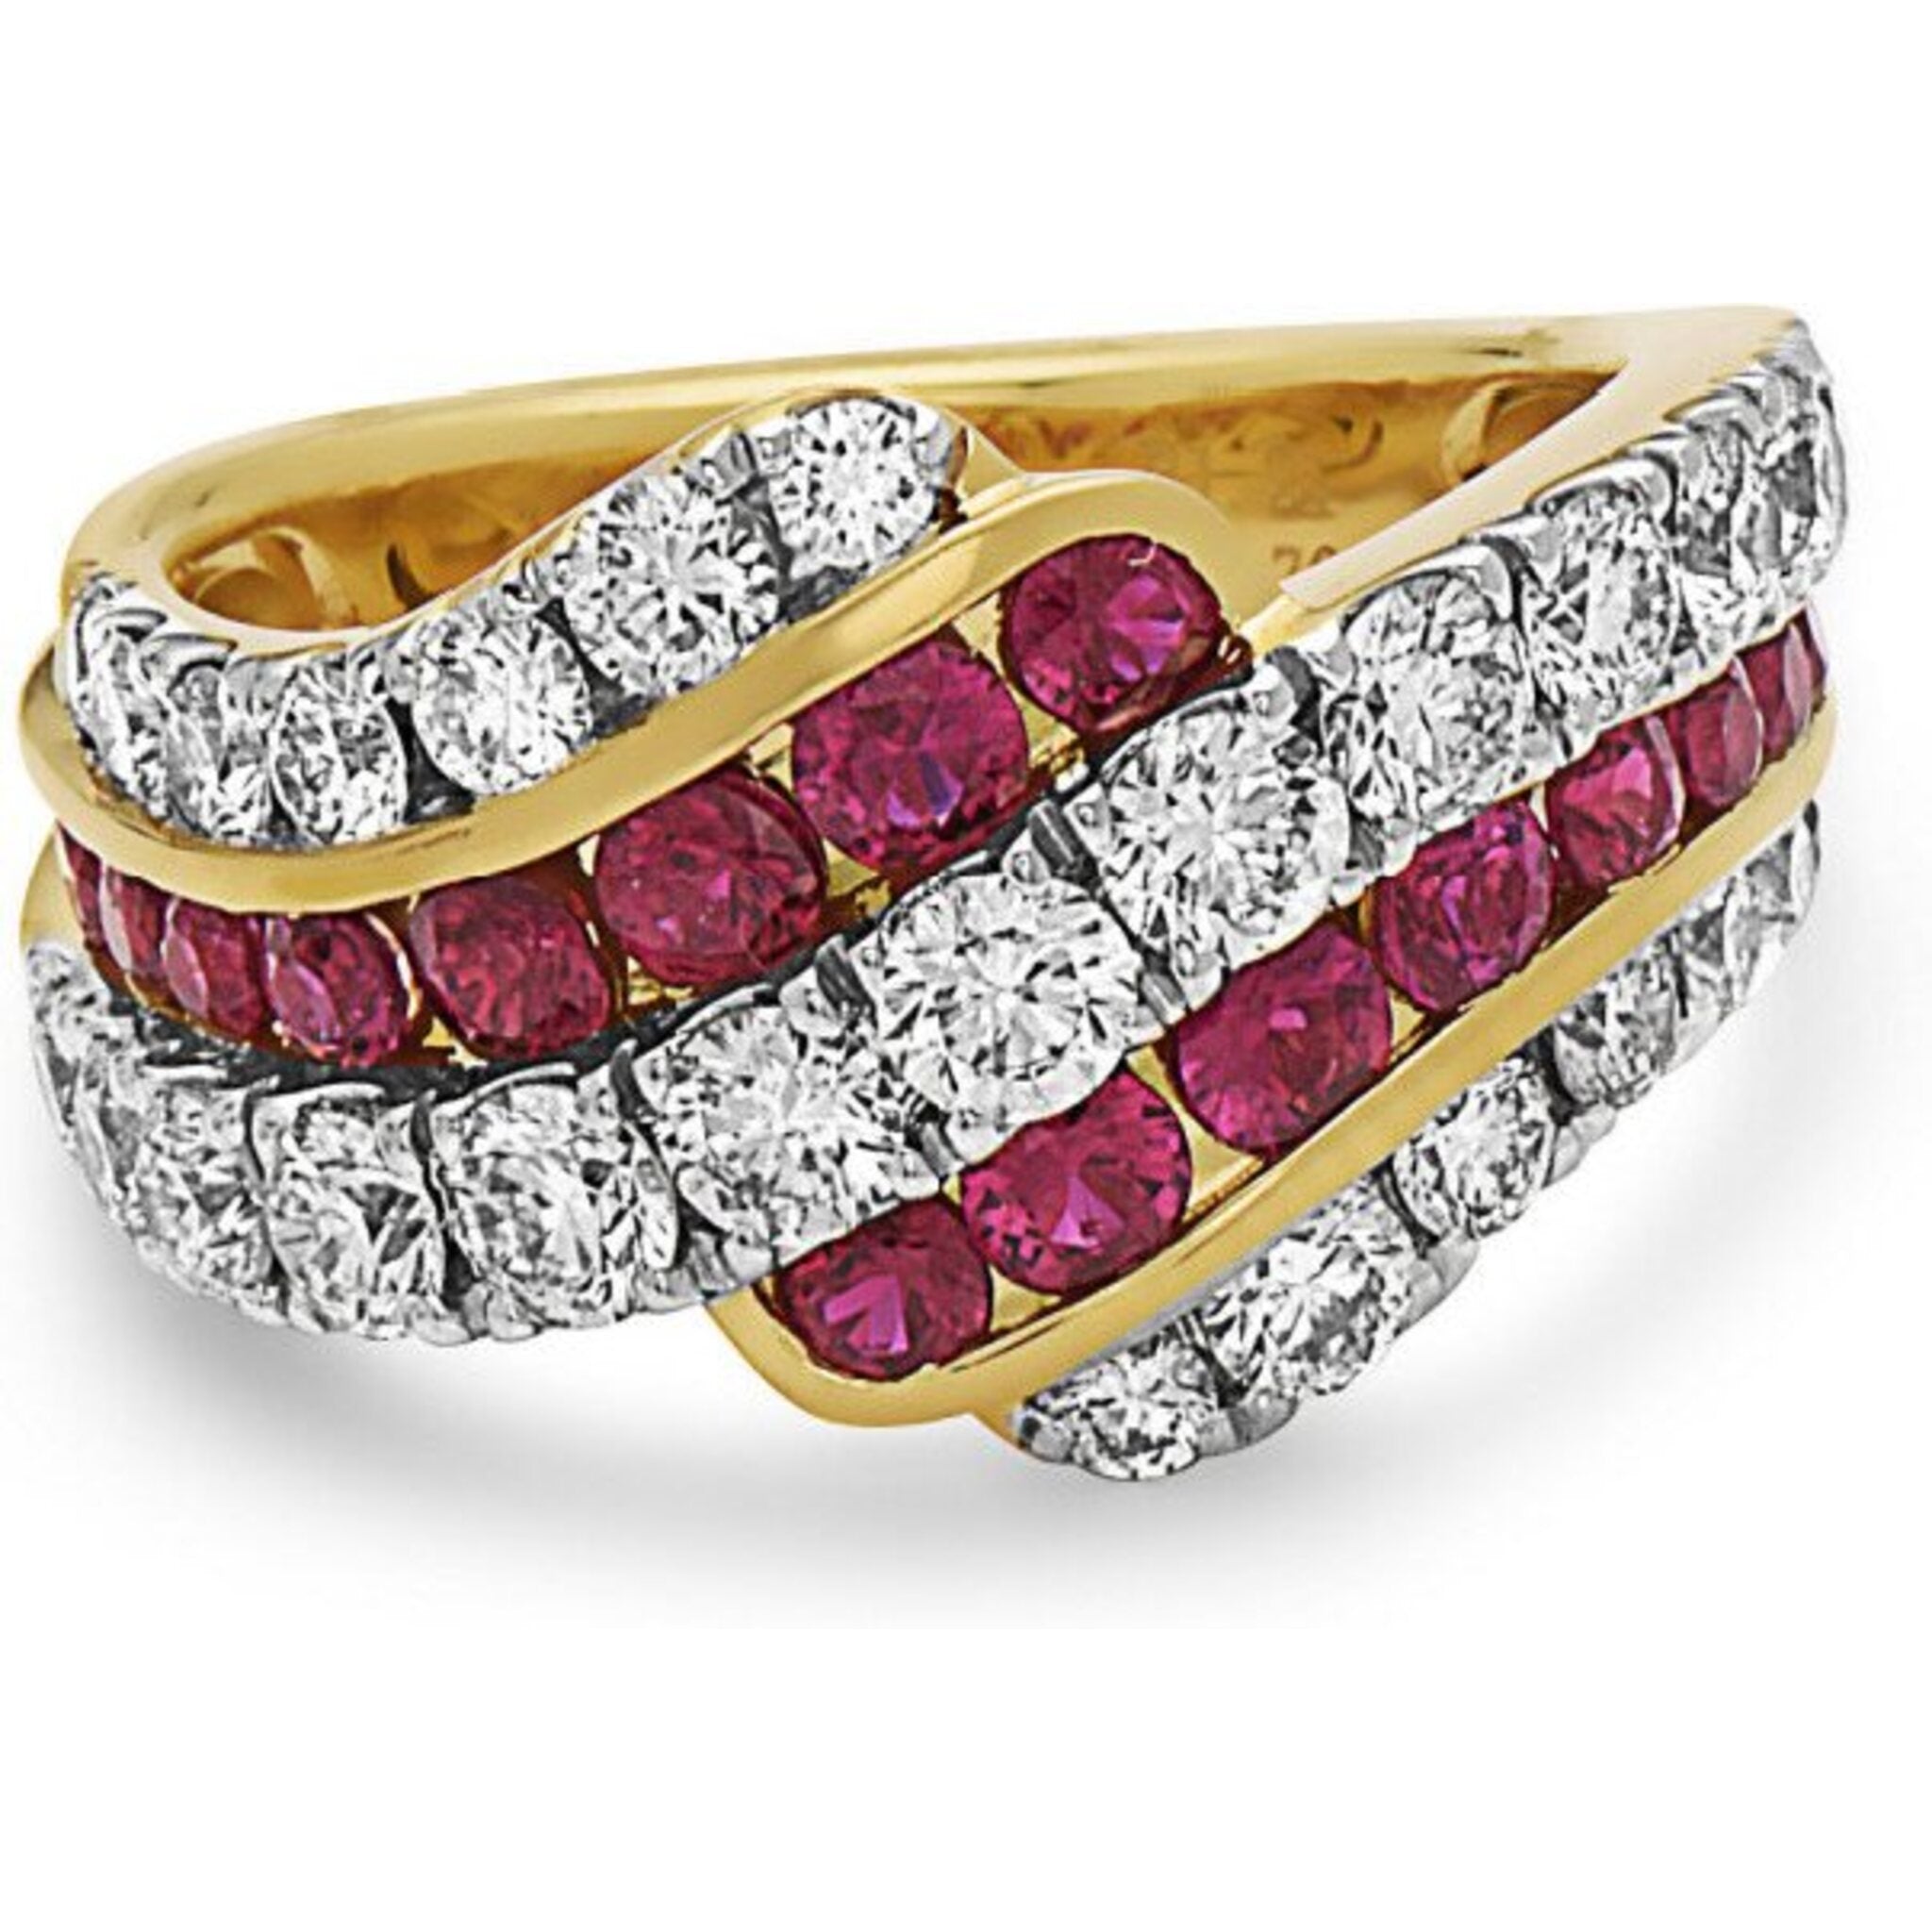 Charles Krypell - Krypell Collection Diamond Curl Ring - Ruby